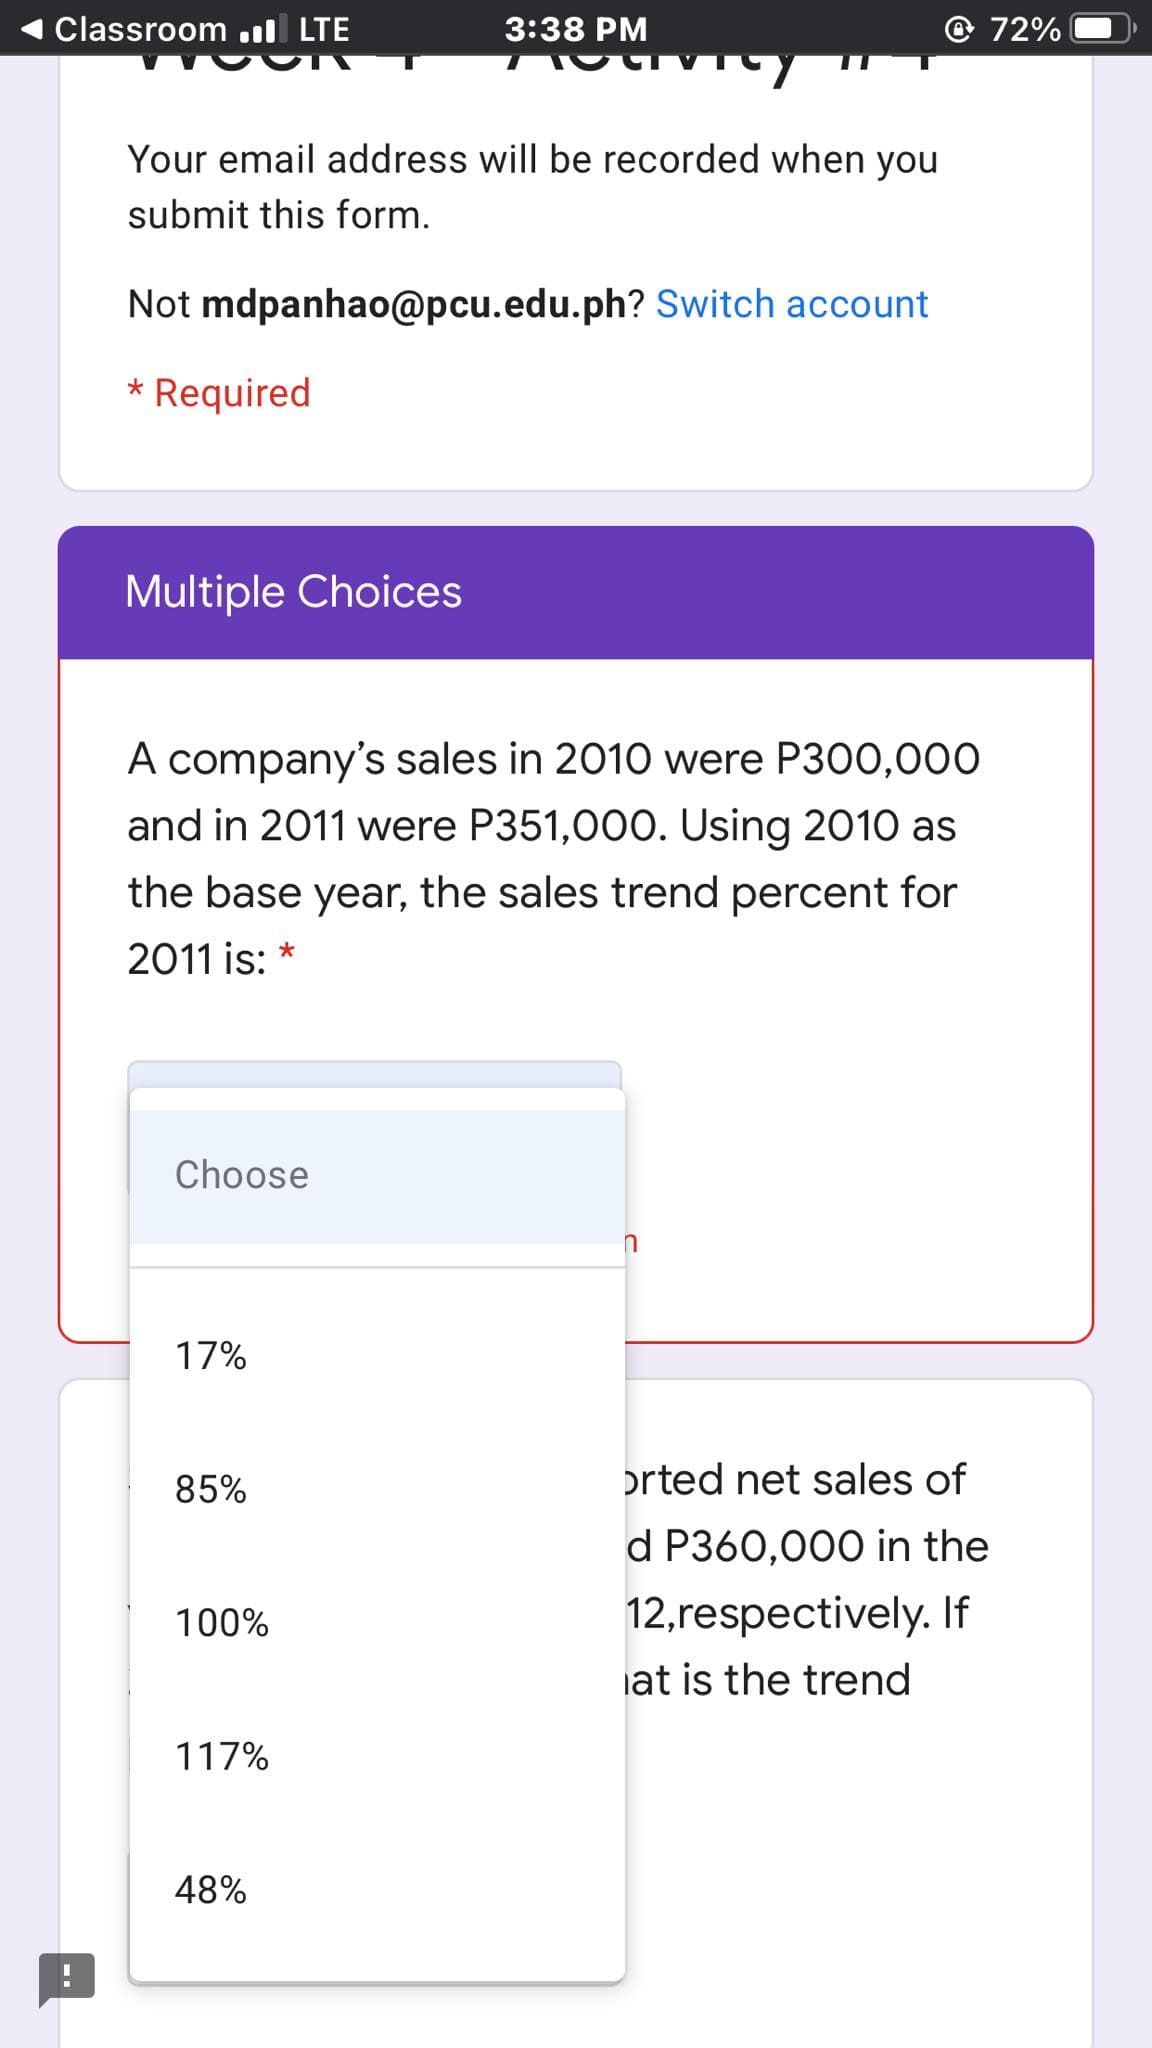 Classroom .il LTE
3:38 PM
72%
Your email address will be recorded when you
submit this form.
Not mdpanhao@pcu.edu.ph? Switch account
* Required
Multiple Choices
A company's sales in 2010 were P300,00O
and in 2011 were P351,000. Using 2010 as
the base year, the sales trend percent for
2011 is:
Choose
17%
85%
orted net sales of
d P360,000 in the
100%
12,respectively. If
iat is the trend
117%
48%
